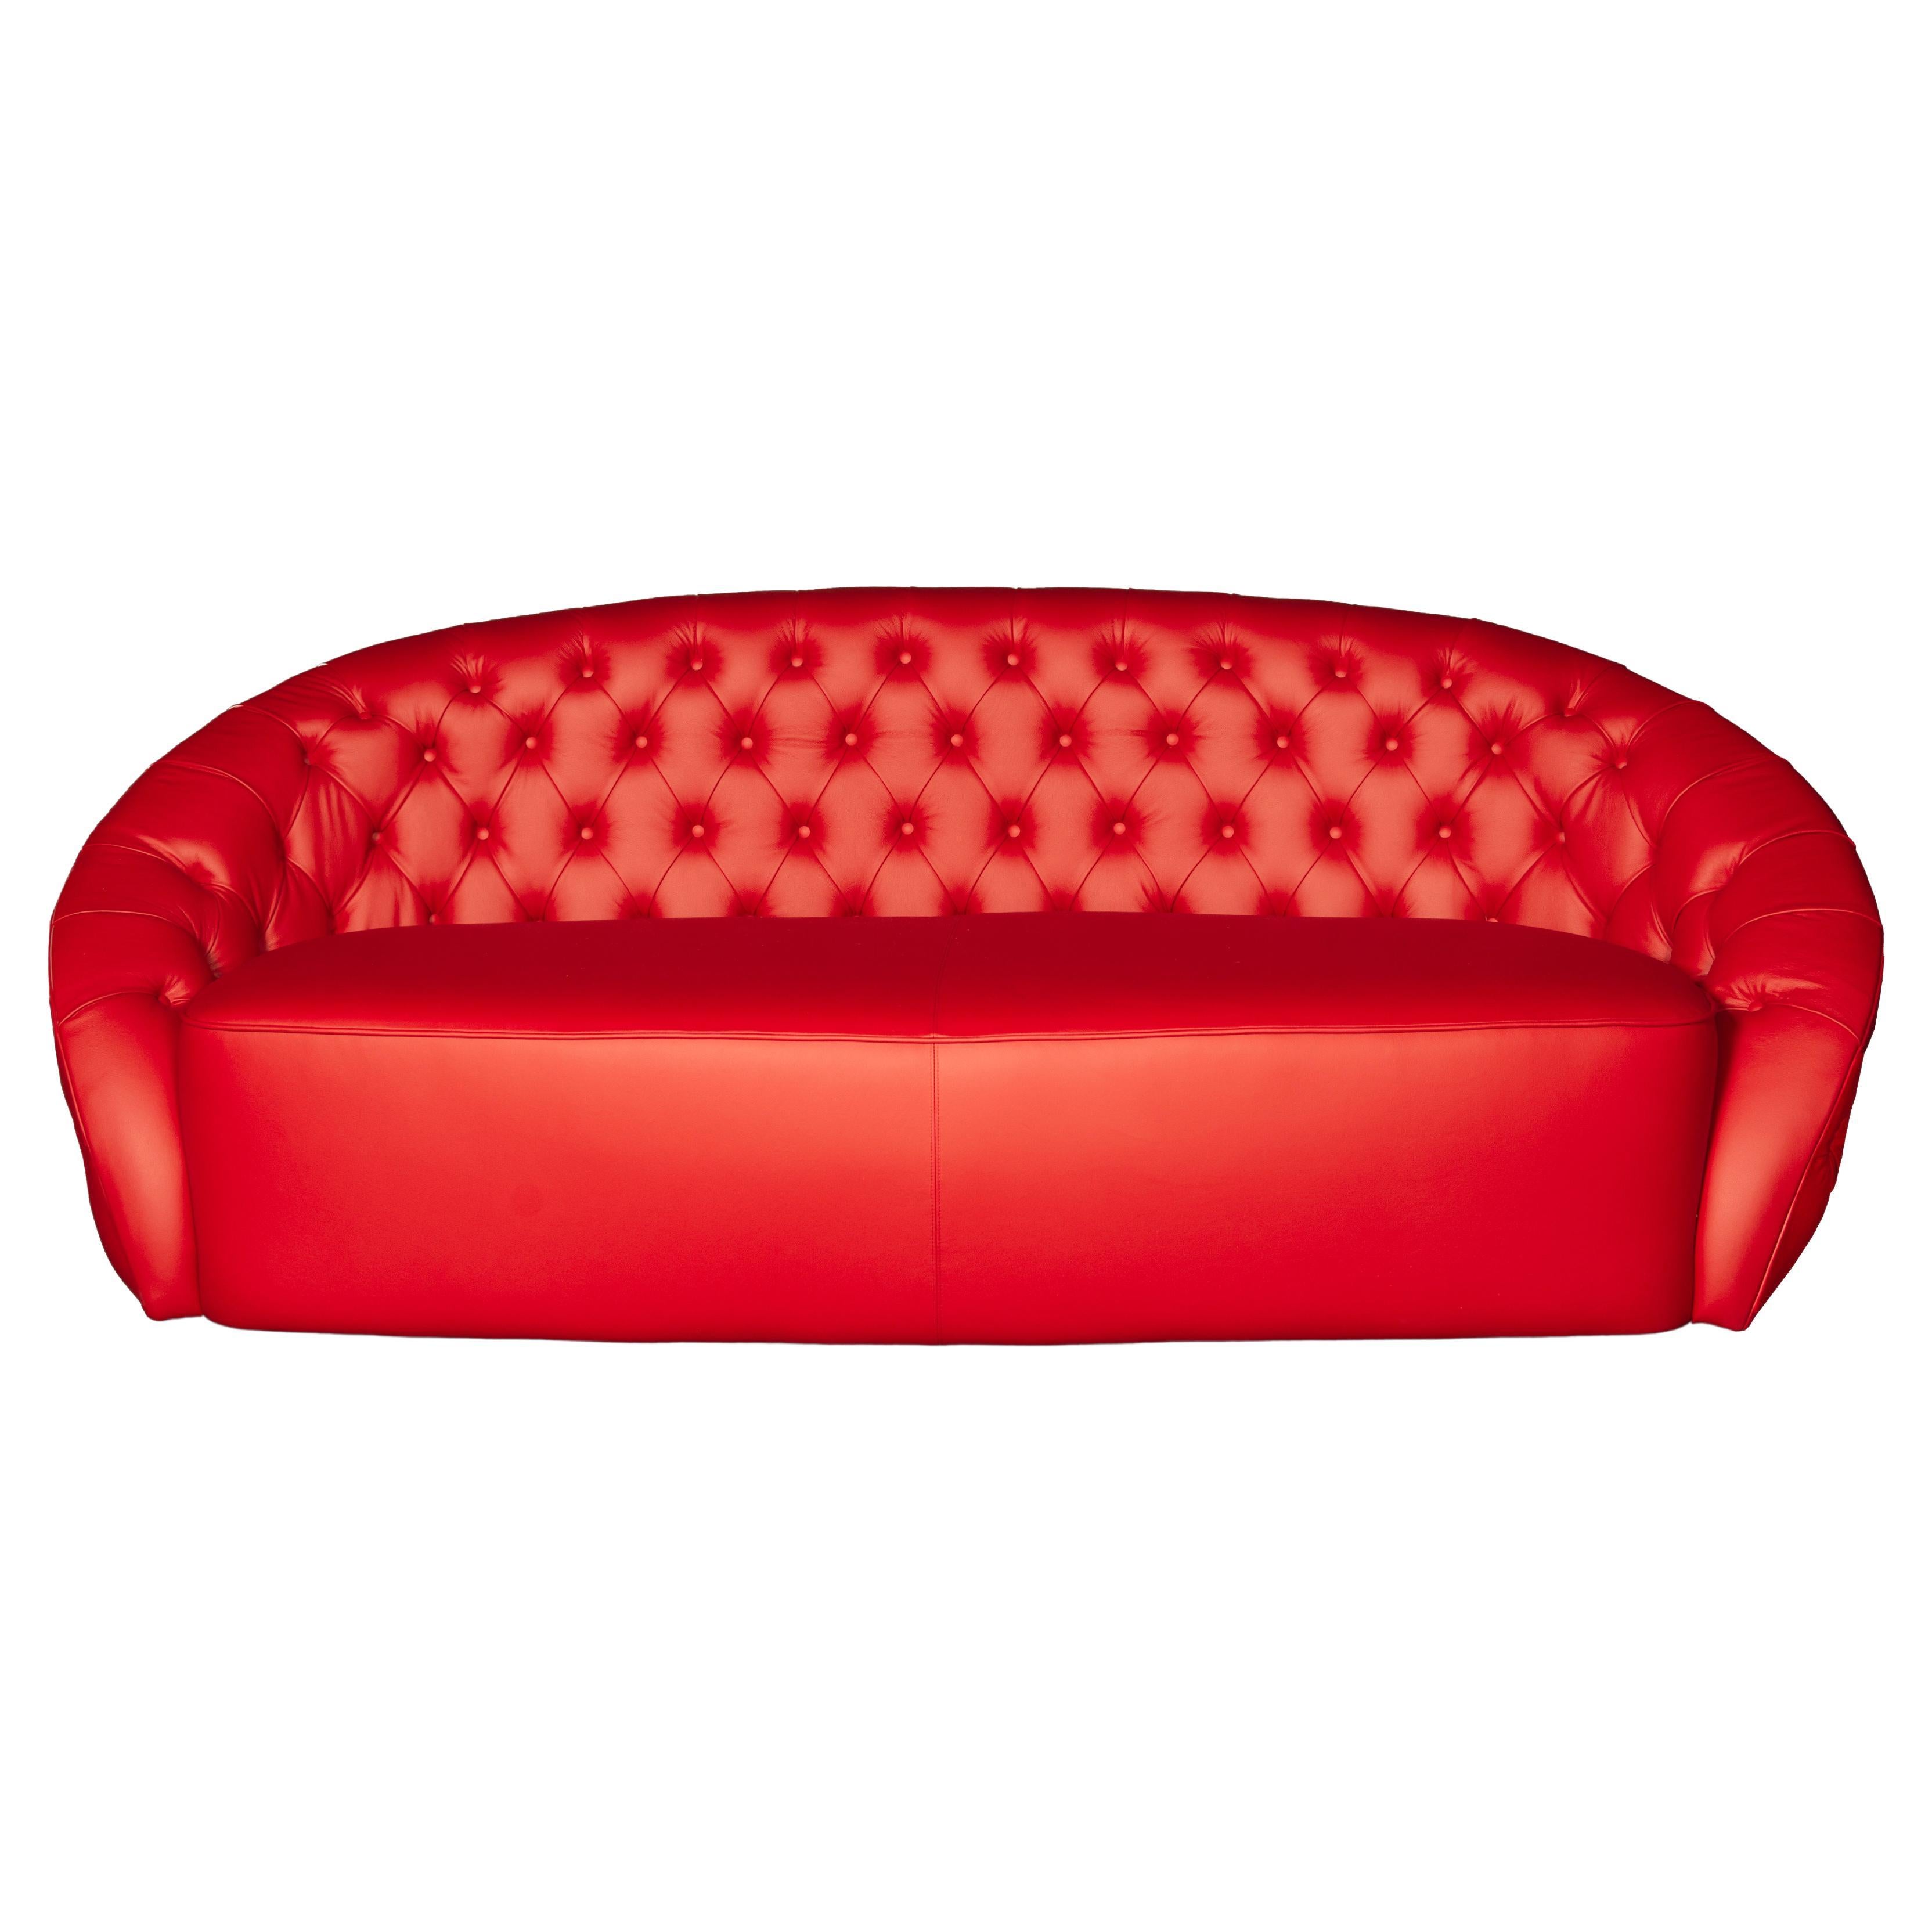 Canapé rond capitonné, cuir rouge, cm 250x115, Made in Italy